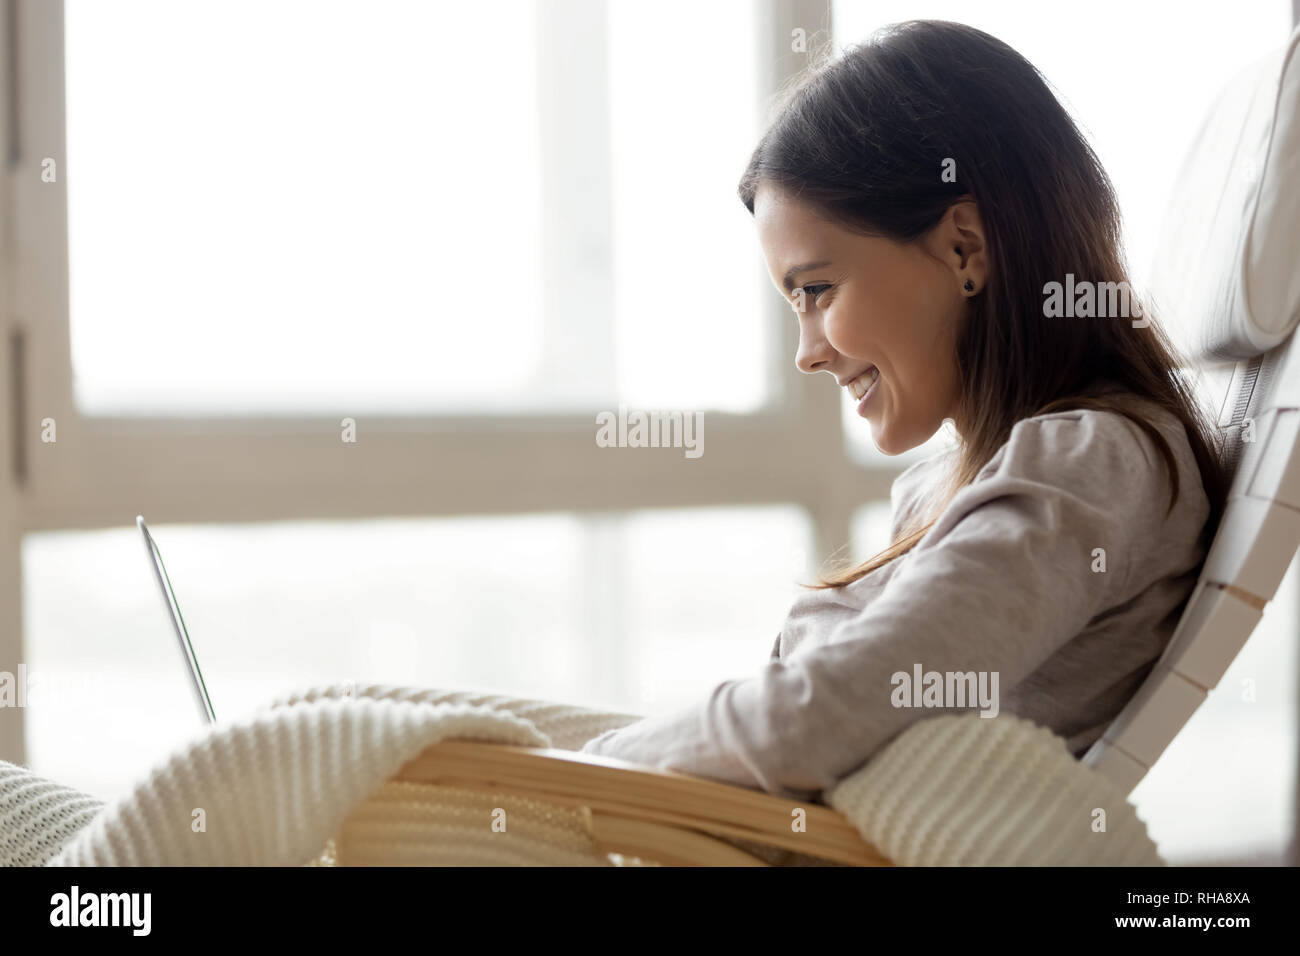 Happy smiling young woman using laptop sitting on rocking chair Banque D'Images